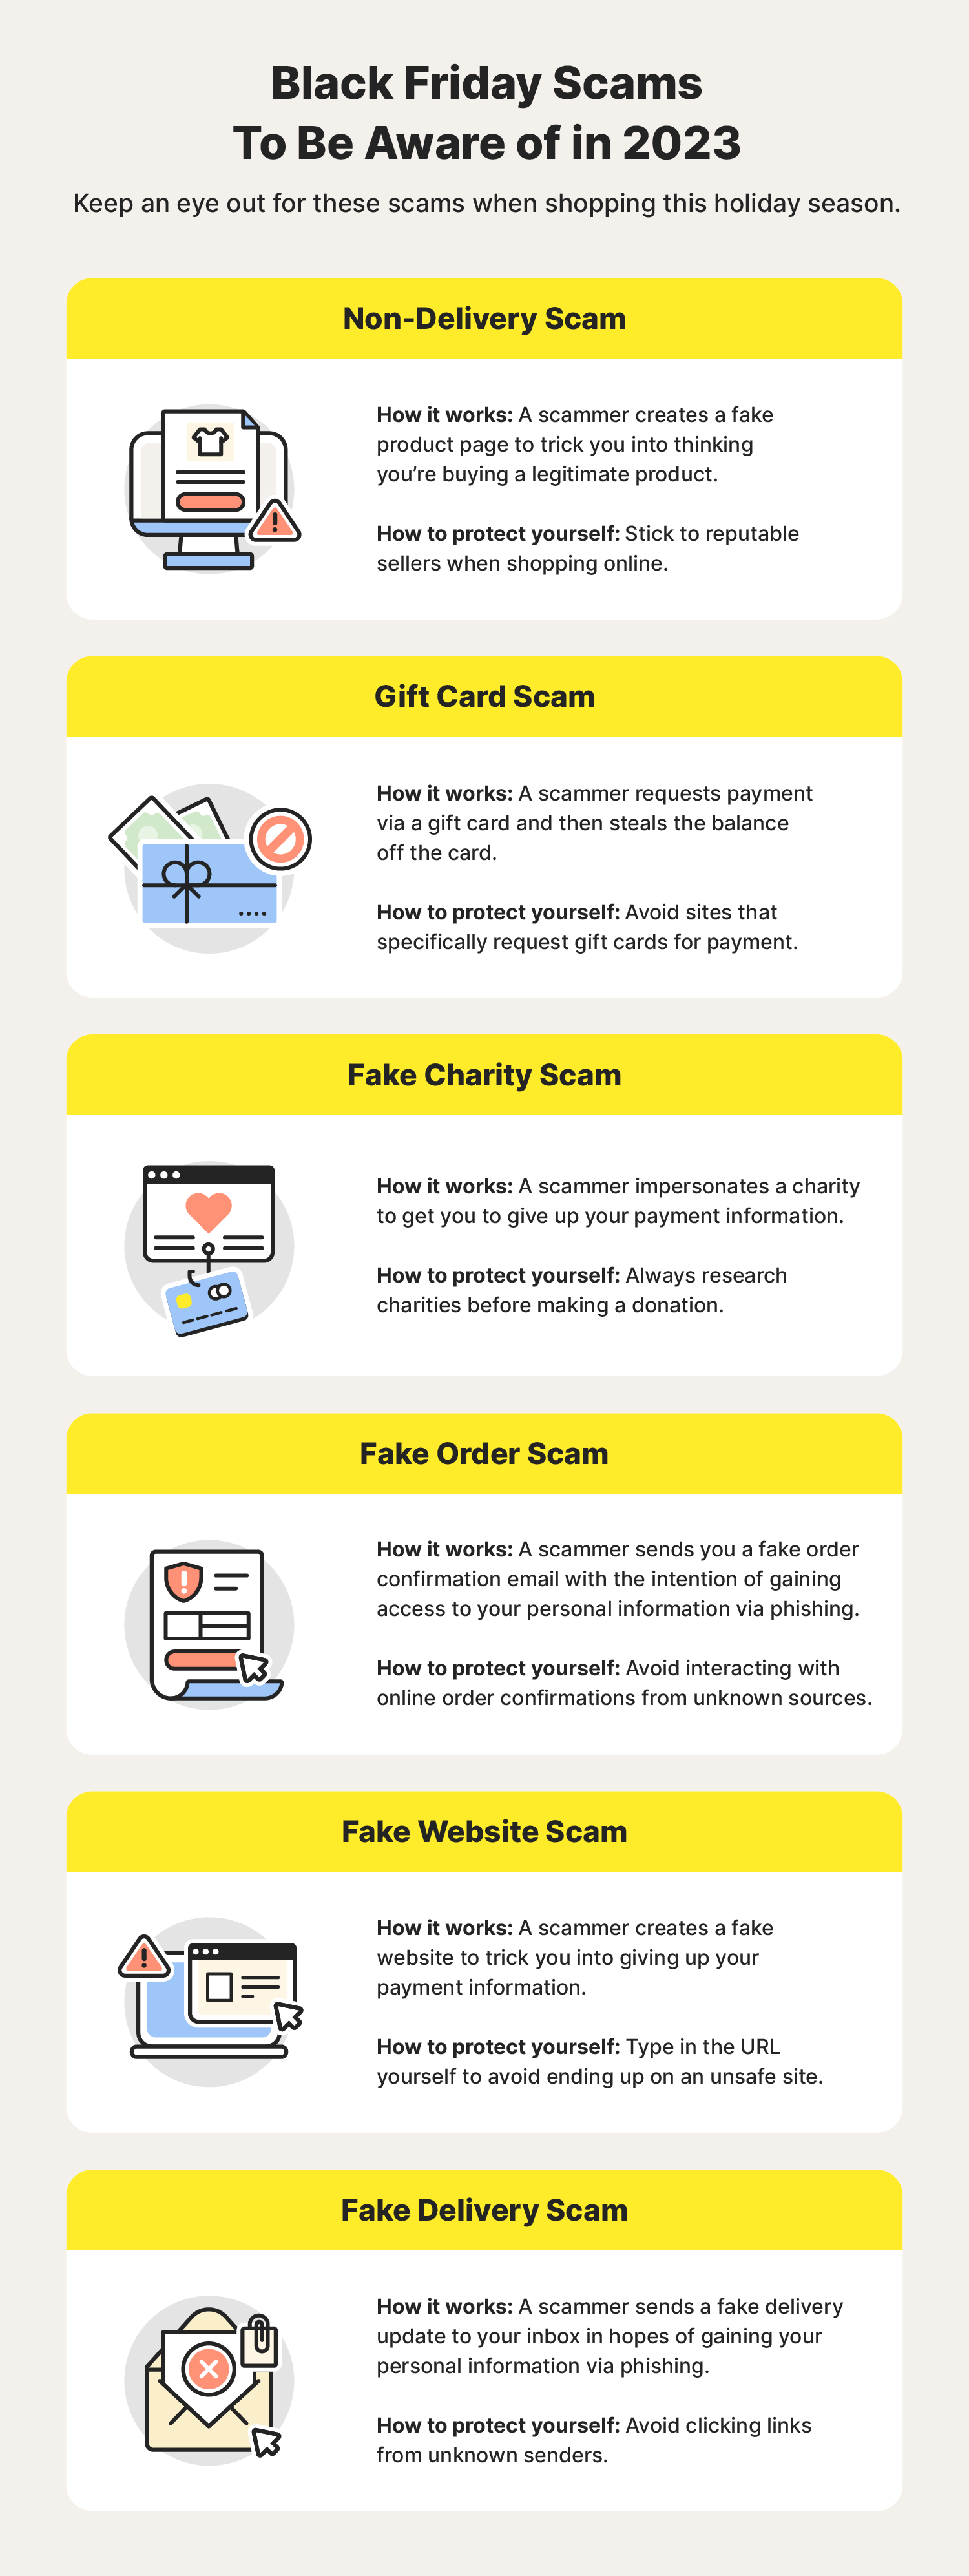 A graphic explains different Black Friday scams ranging from non-delivery to fake charity scams.